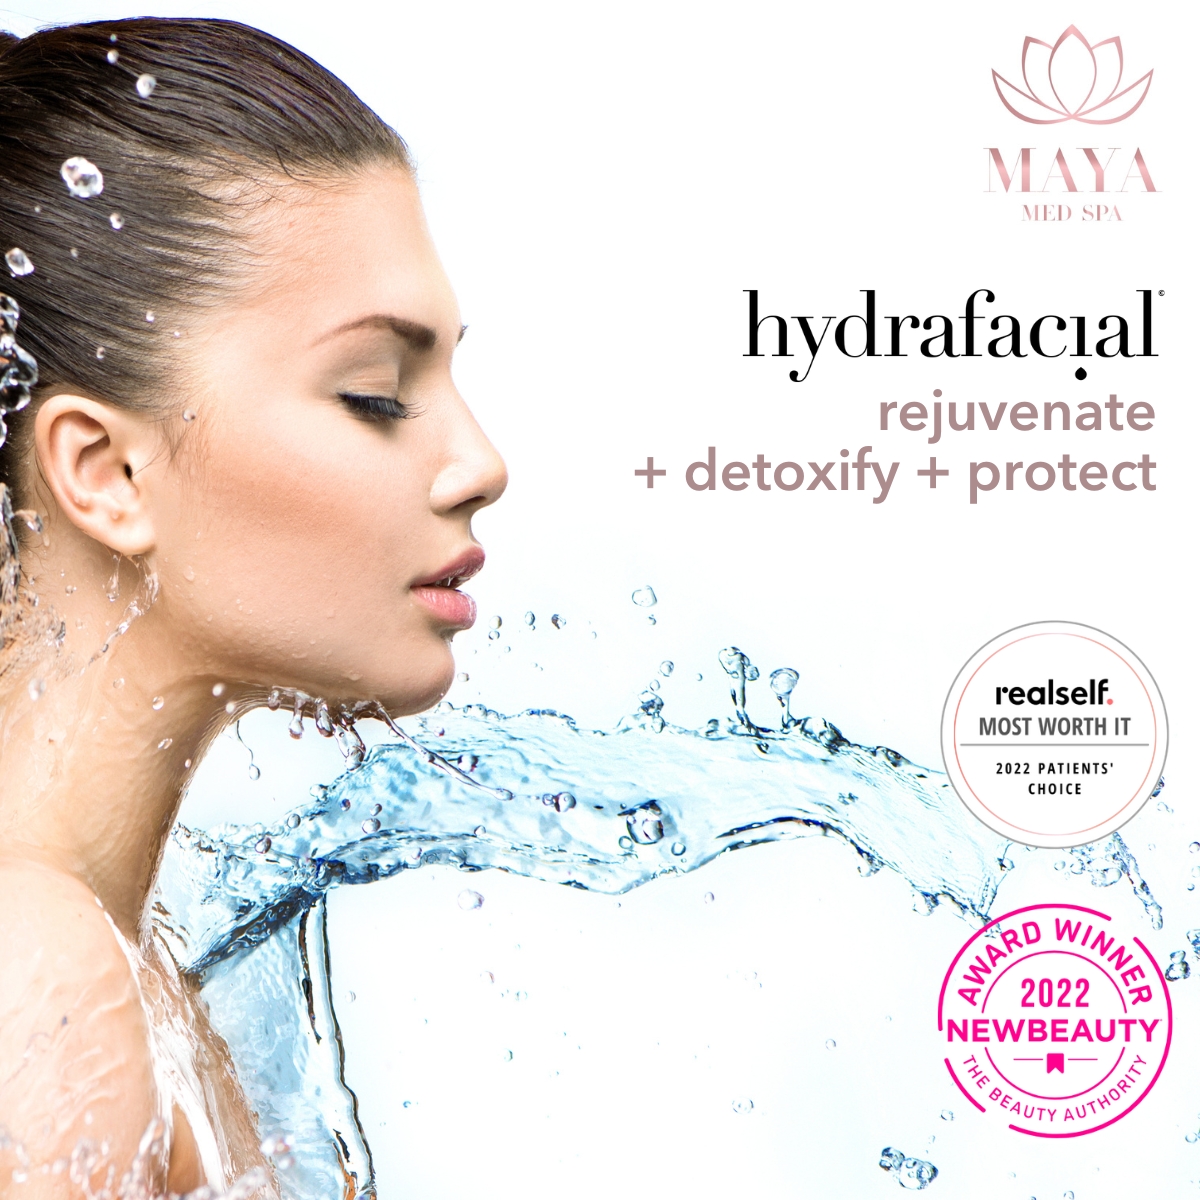 A stunning woman advertising Hydrafacial- a service offered by Maya Medspa in Little Falls, New Jersey.